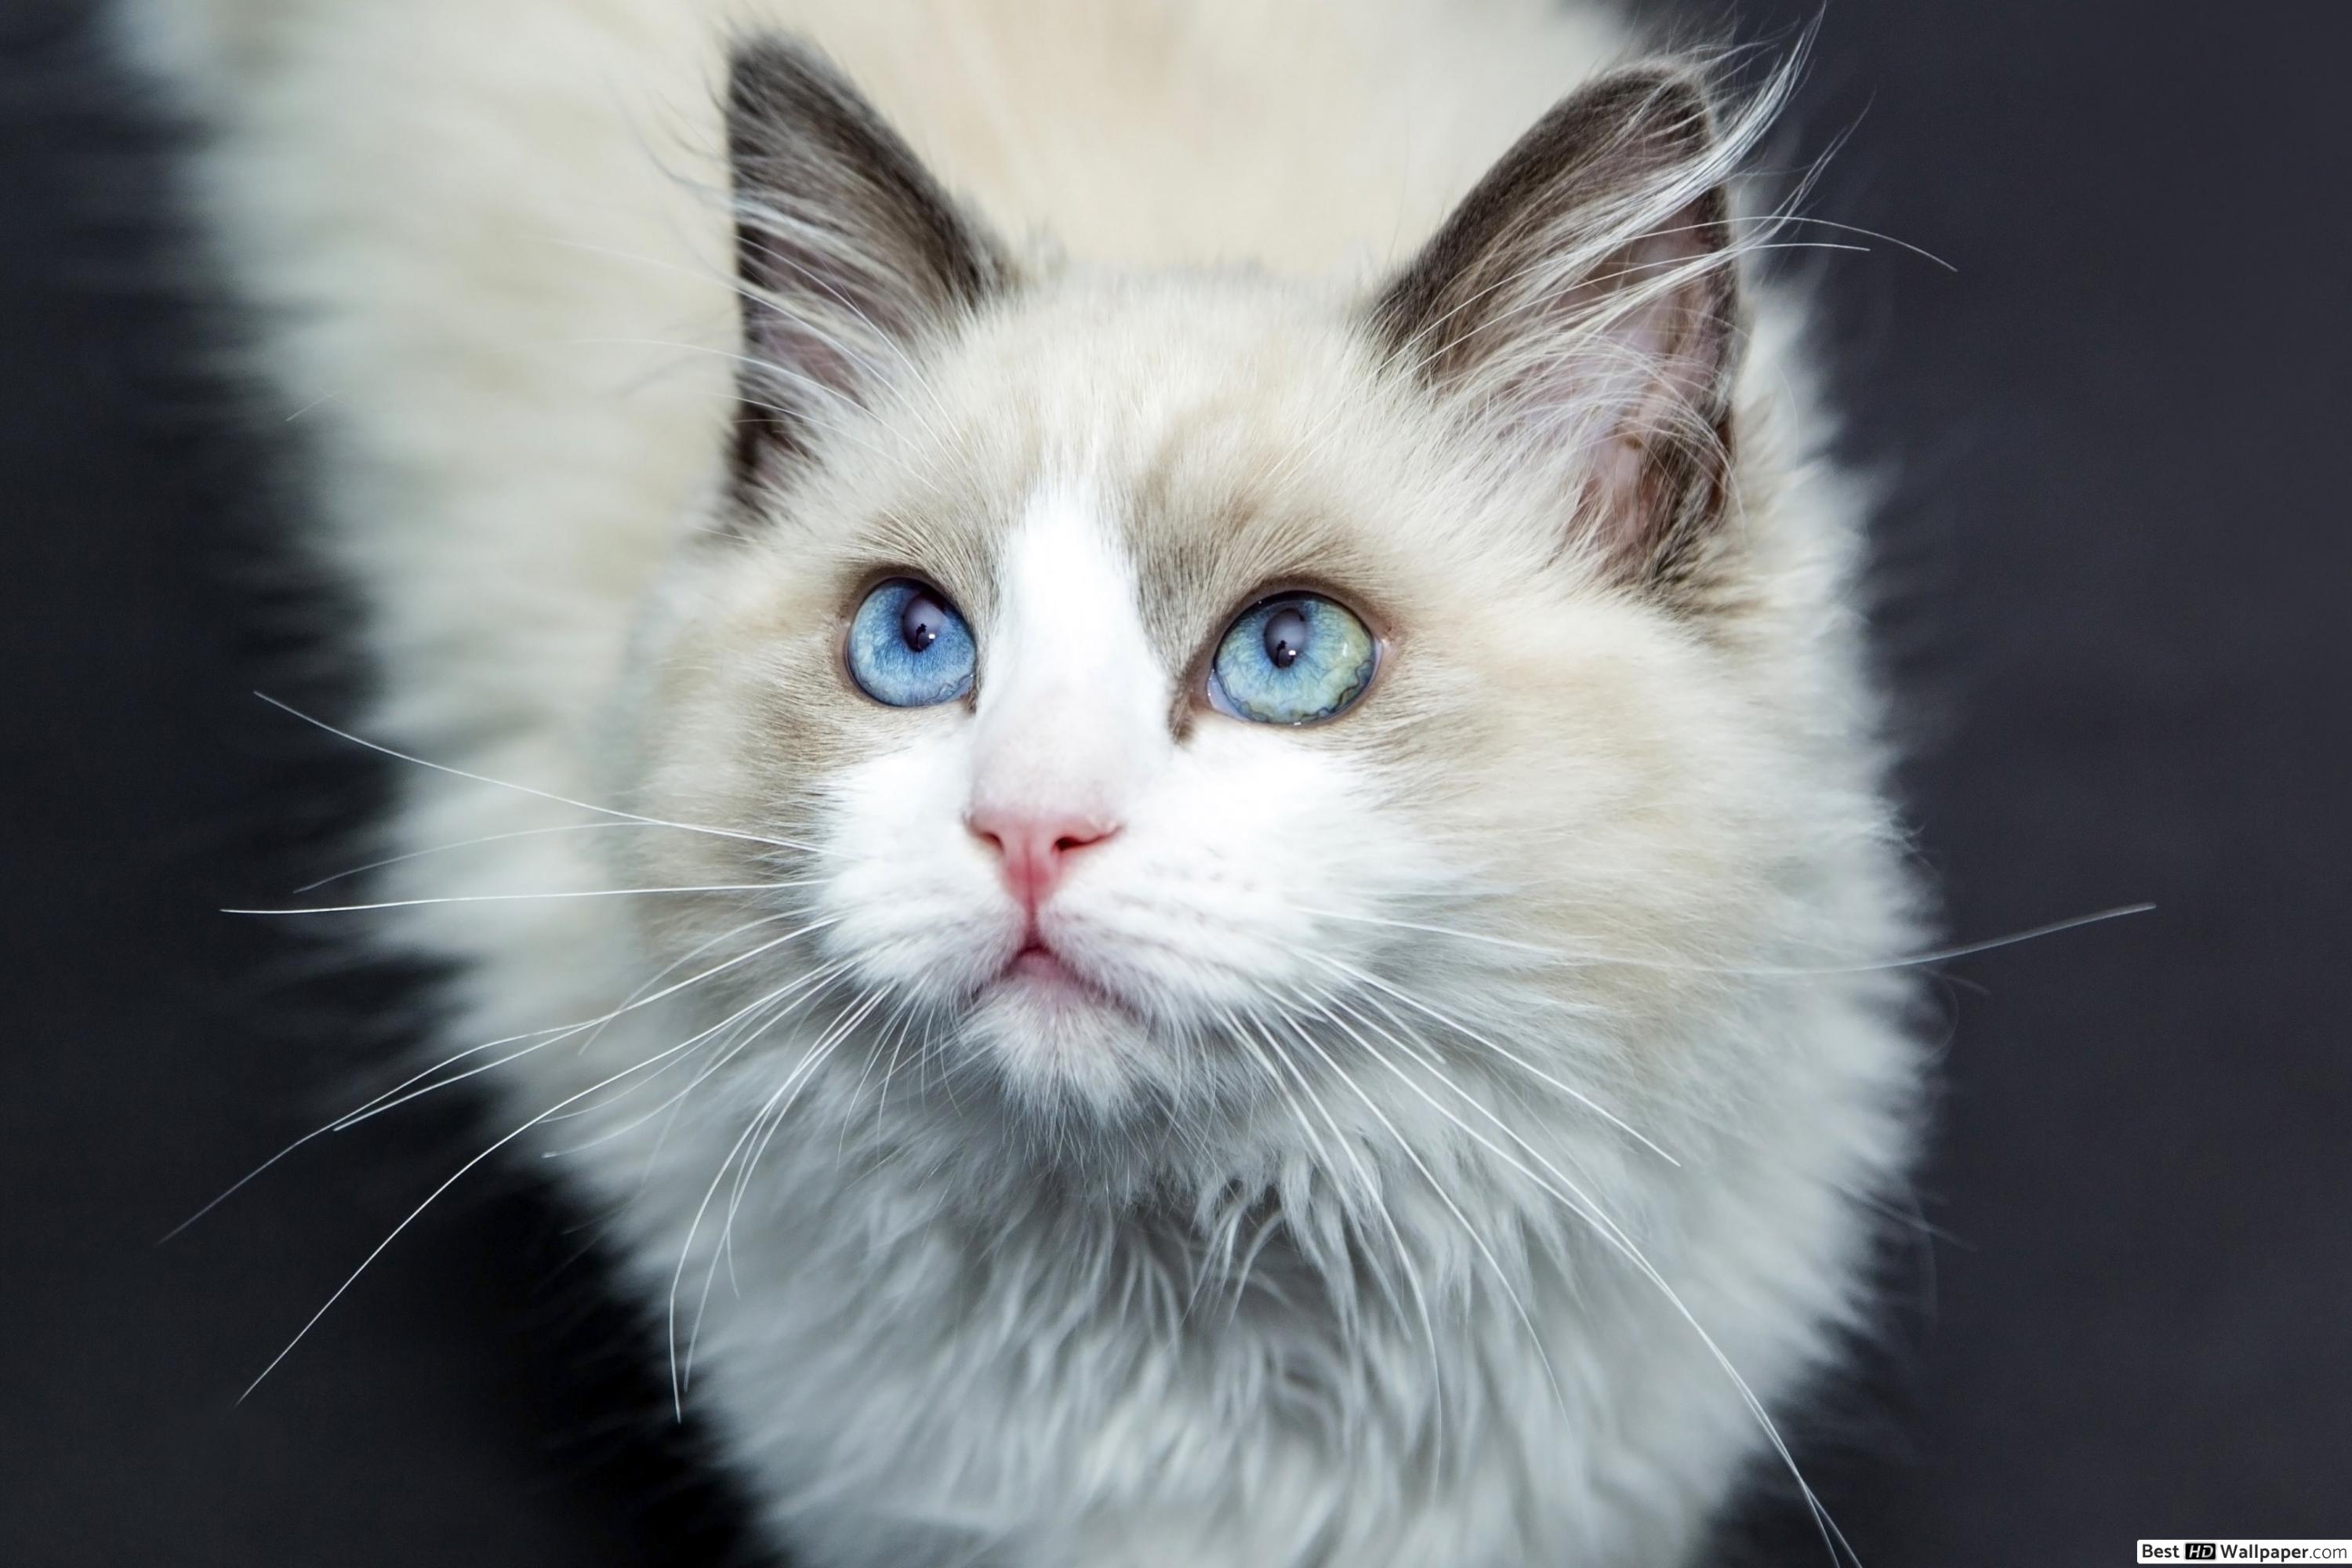 White Fluffy Cat With Blue Eyes - HD Wallpaper 